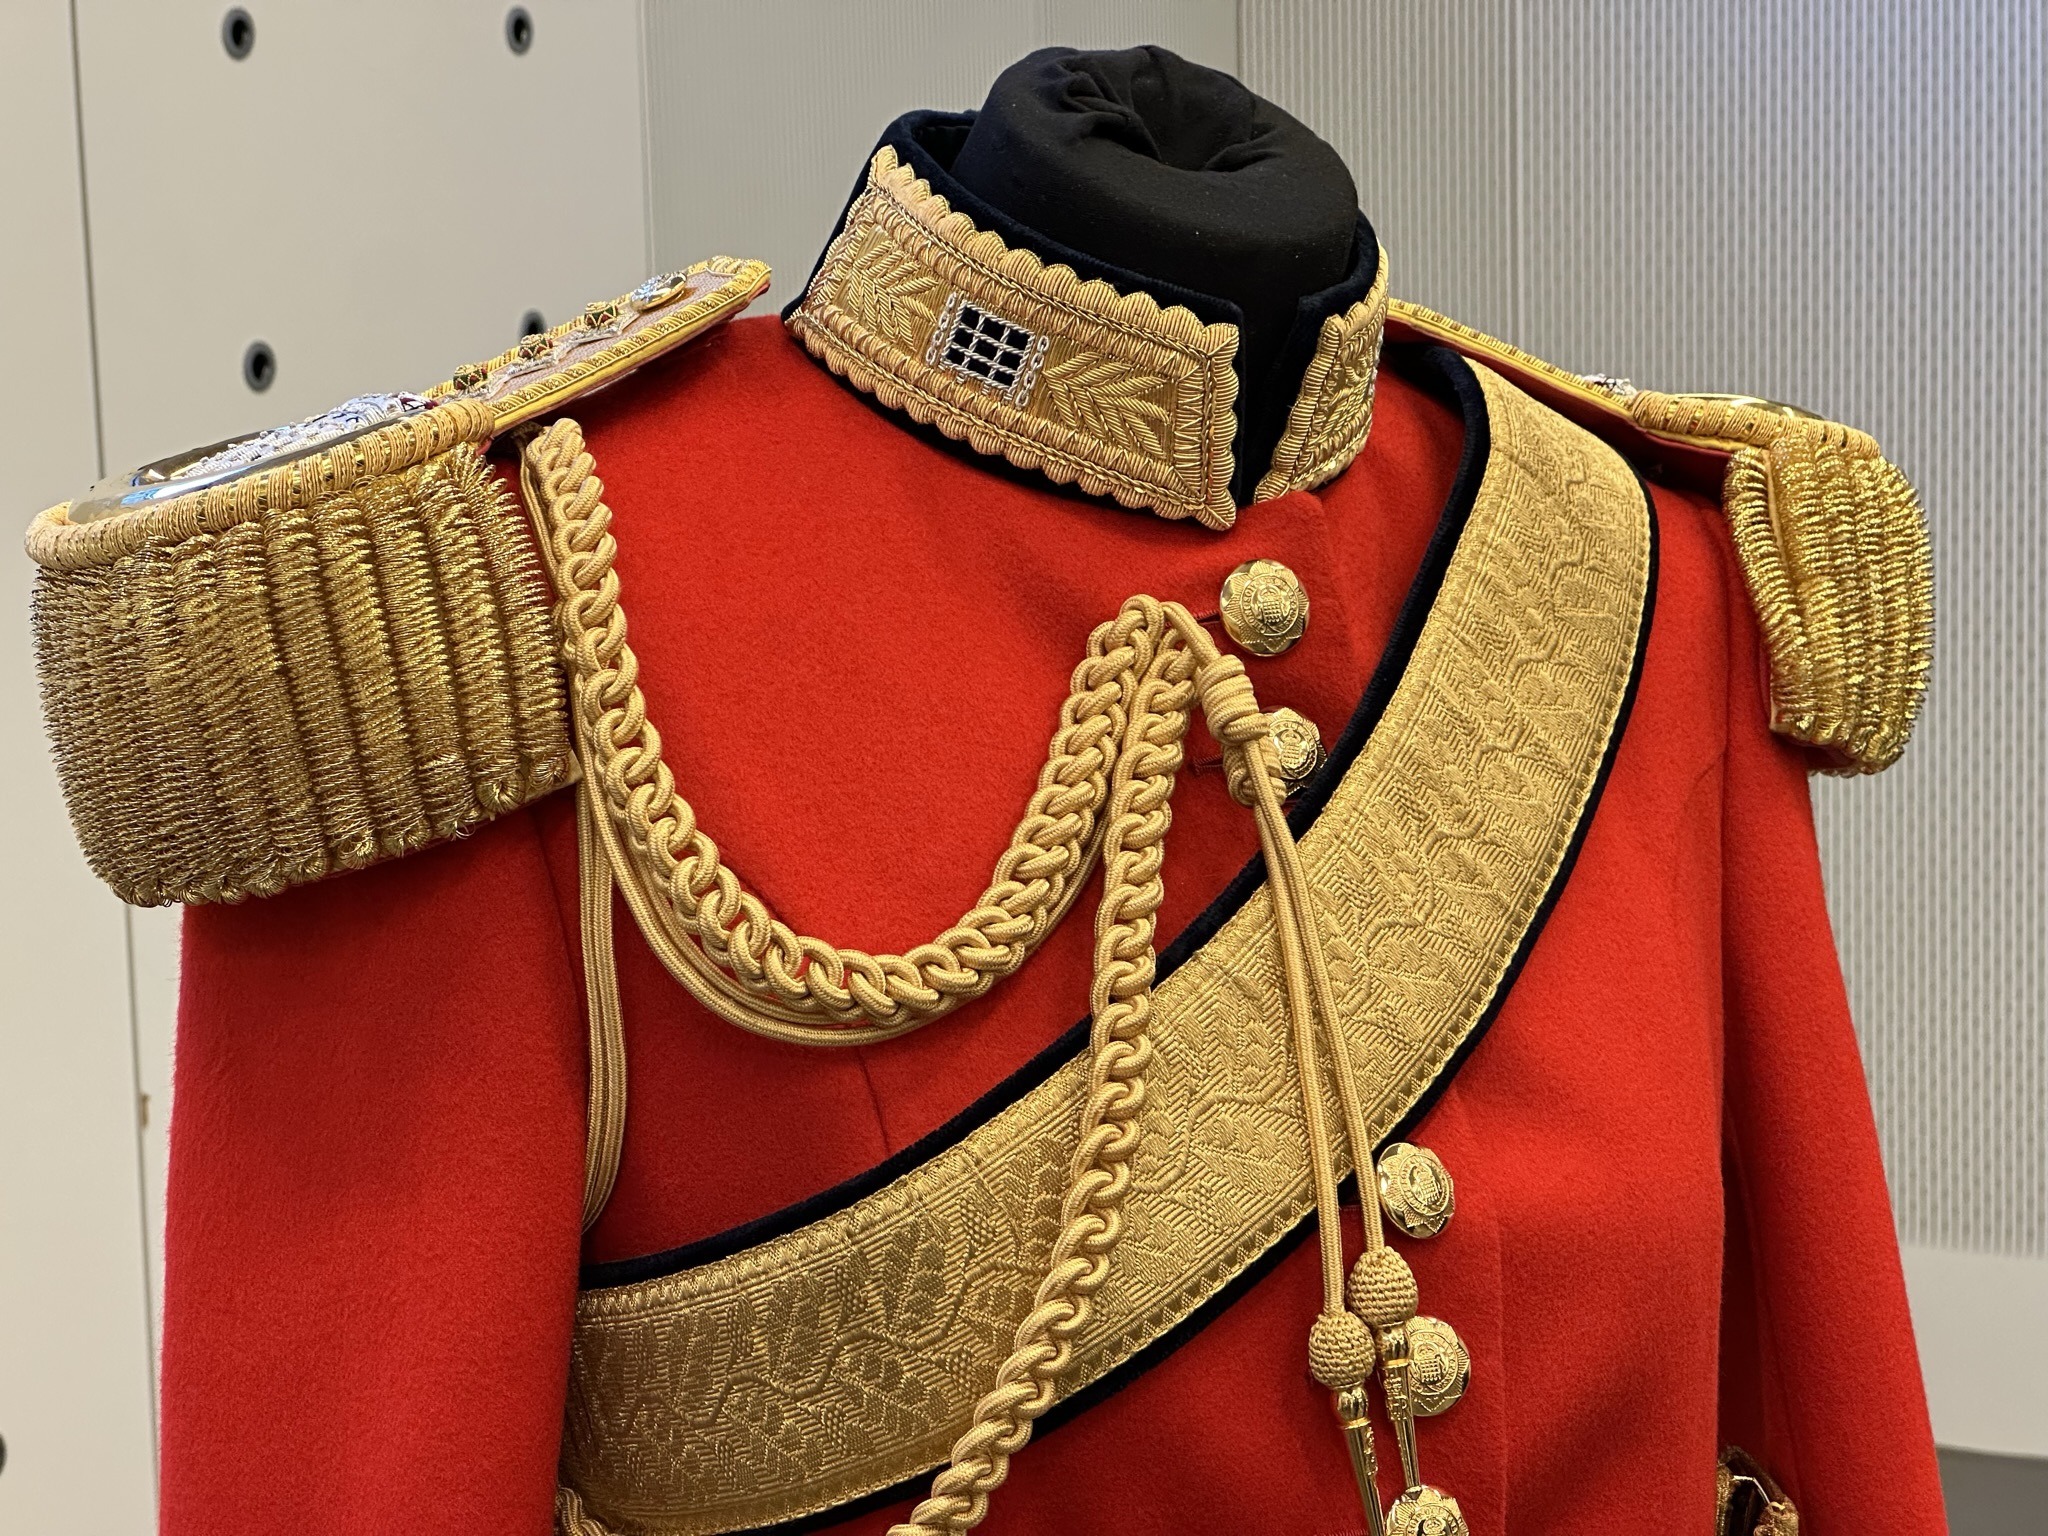 Front of the Captain's uniform showing Aiguillettes (fancy rope work). Gentlemen at Arms ceremonial uniform, the ceremonial bodyguard of King Charles III, which was founded by King Henry VIII in 1509. 13-May-2023.